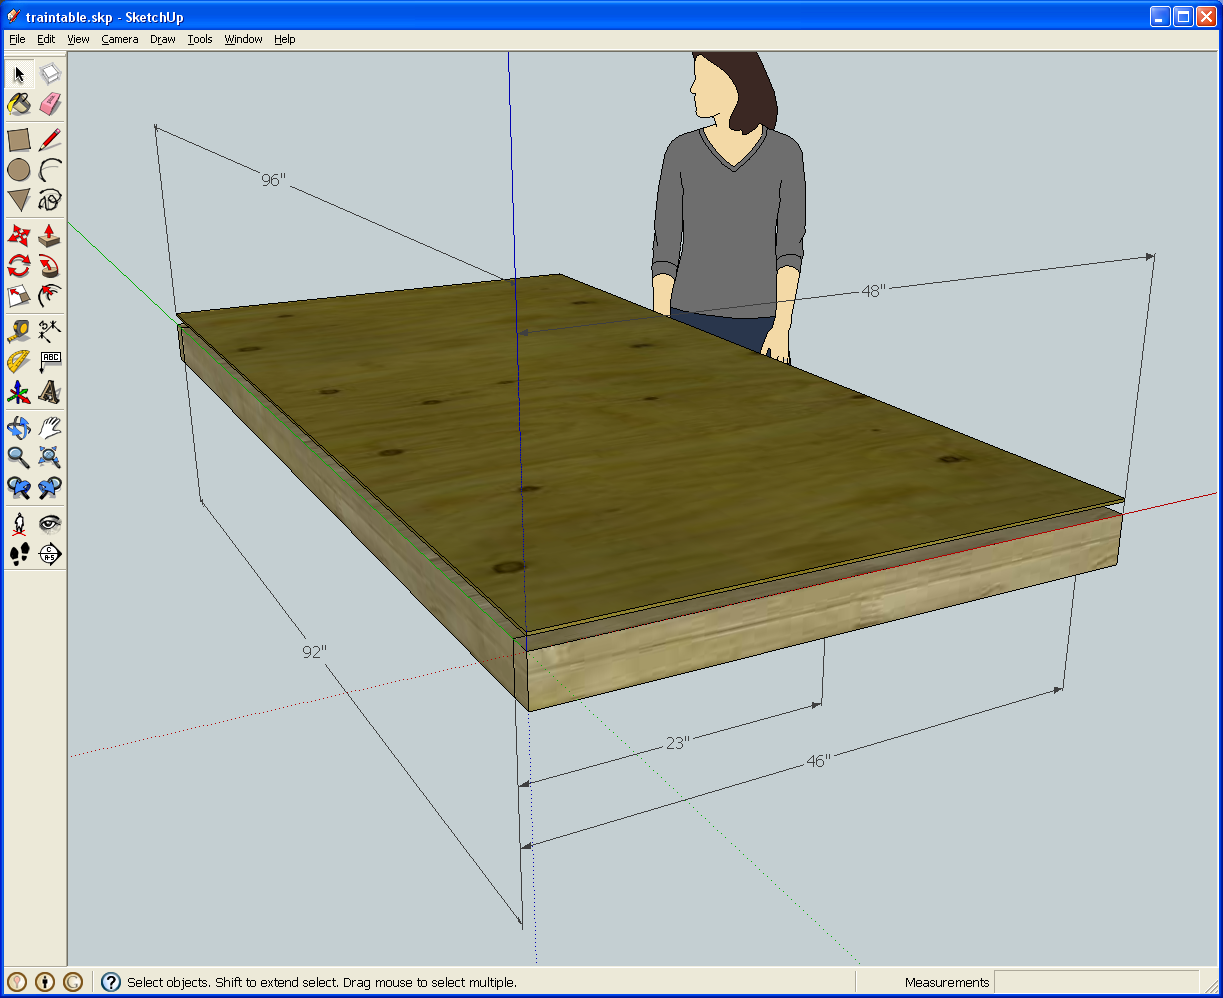 The sketchup'd model train table. - Adventures in Engineering